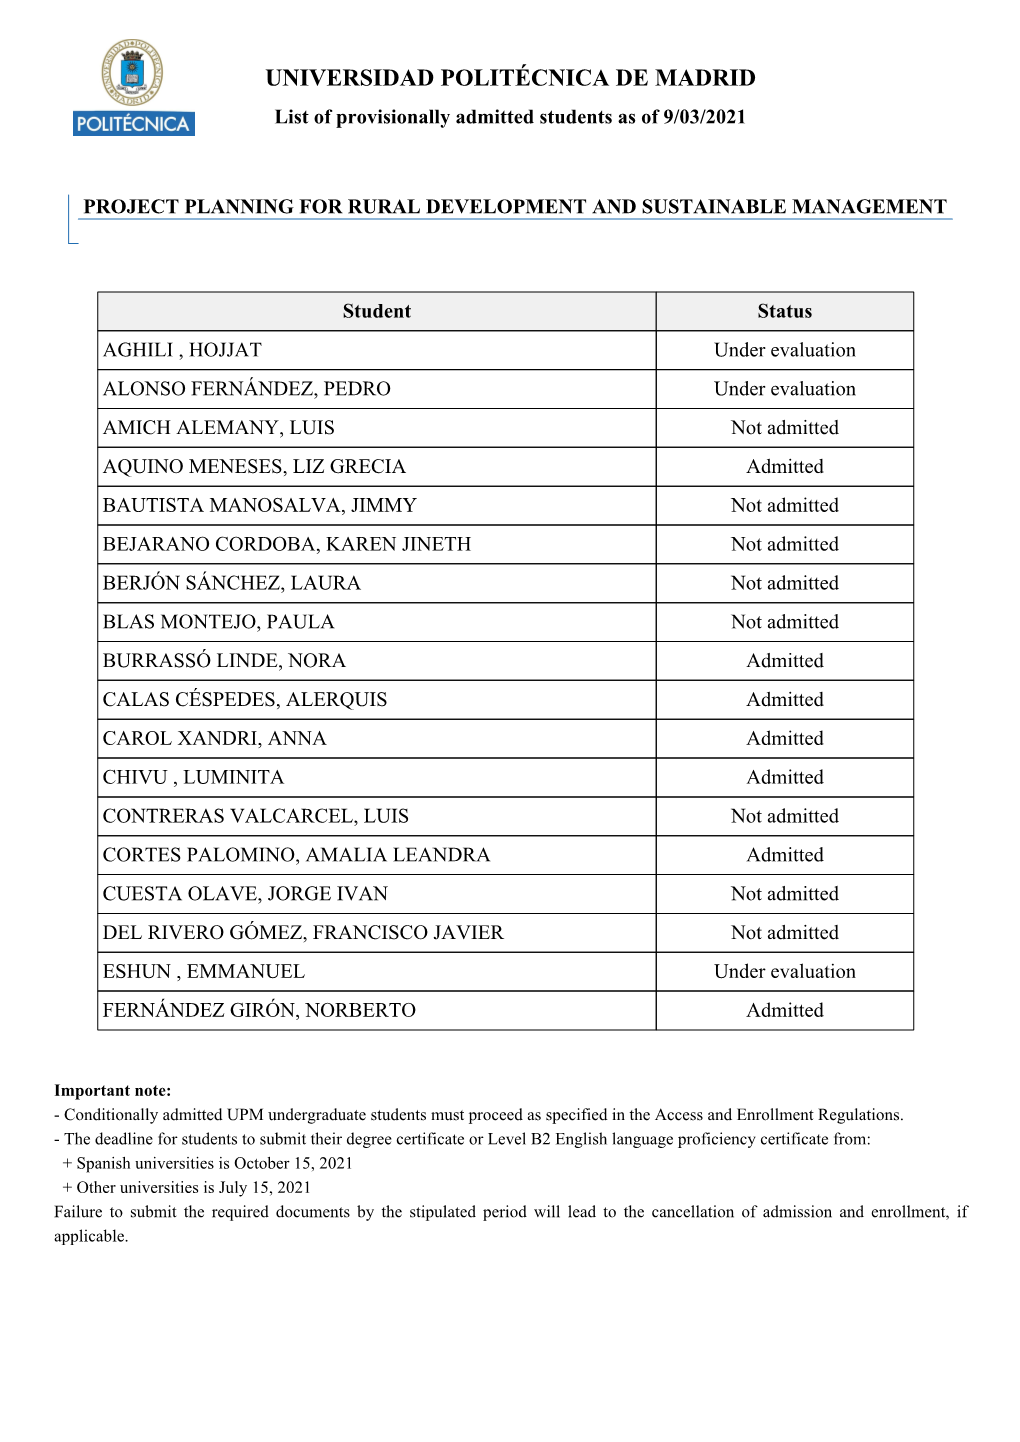 UNIVERSIDAD POLITÉCNICA DE MADRID List of Provisionally Admitted Students As of 9/03/2021